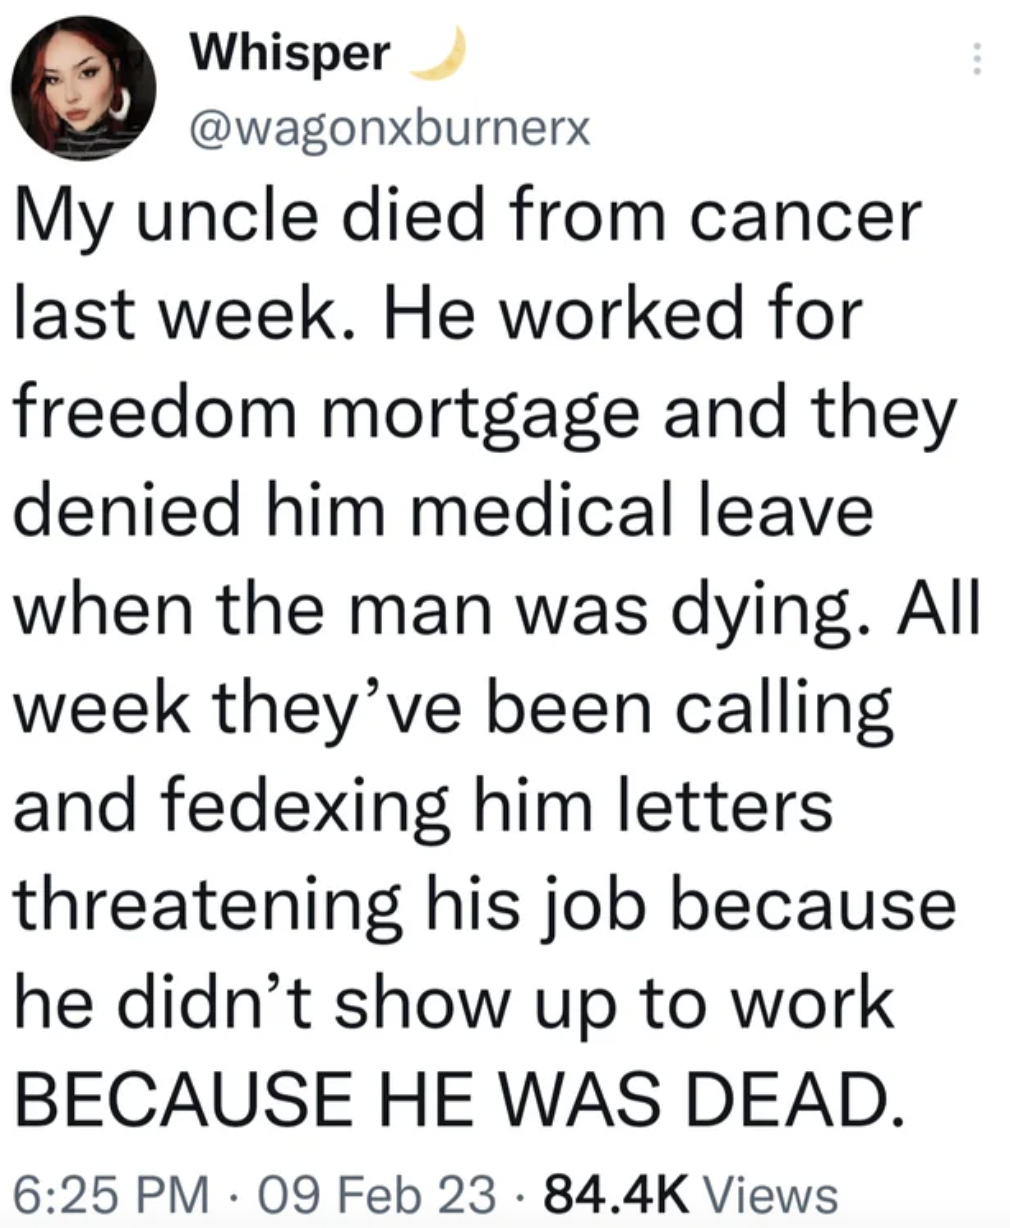 Facepalms - quotes - Whisper My uncle died from cancer last week. He worked for freedom mortgage and they denied him medical leave when the man was dying. All week they've been calling and fedexing him letters threatening his job because he didn't show up